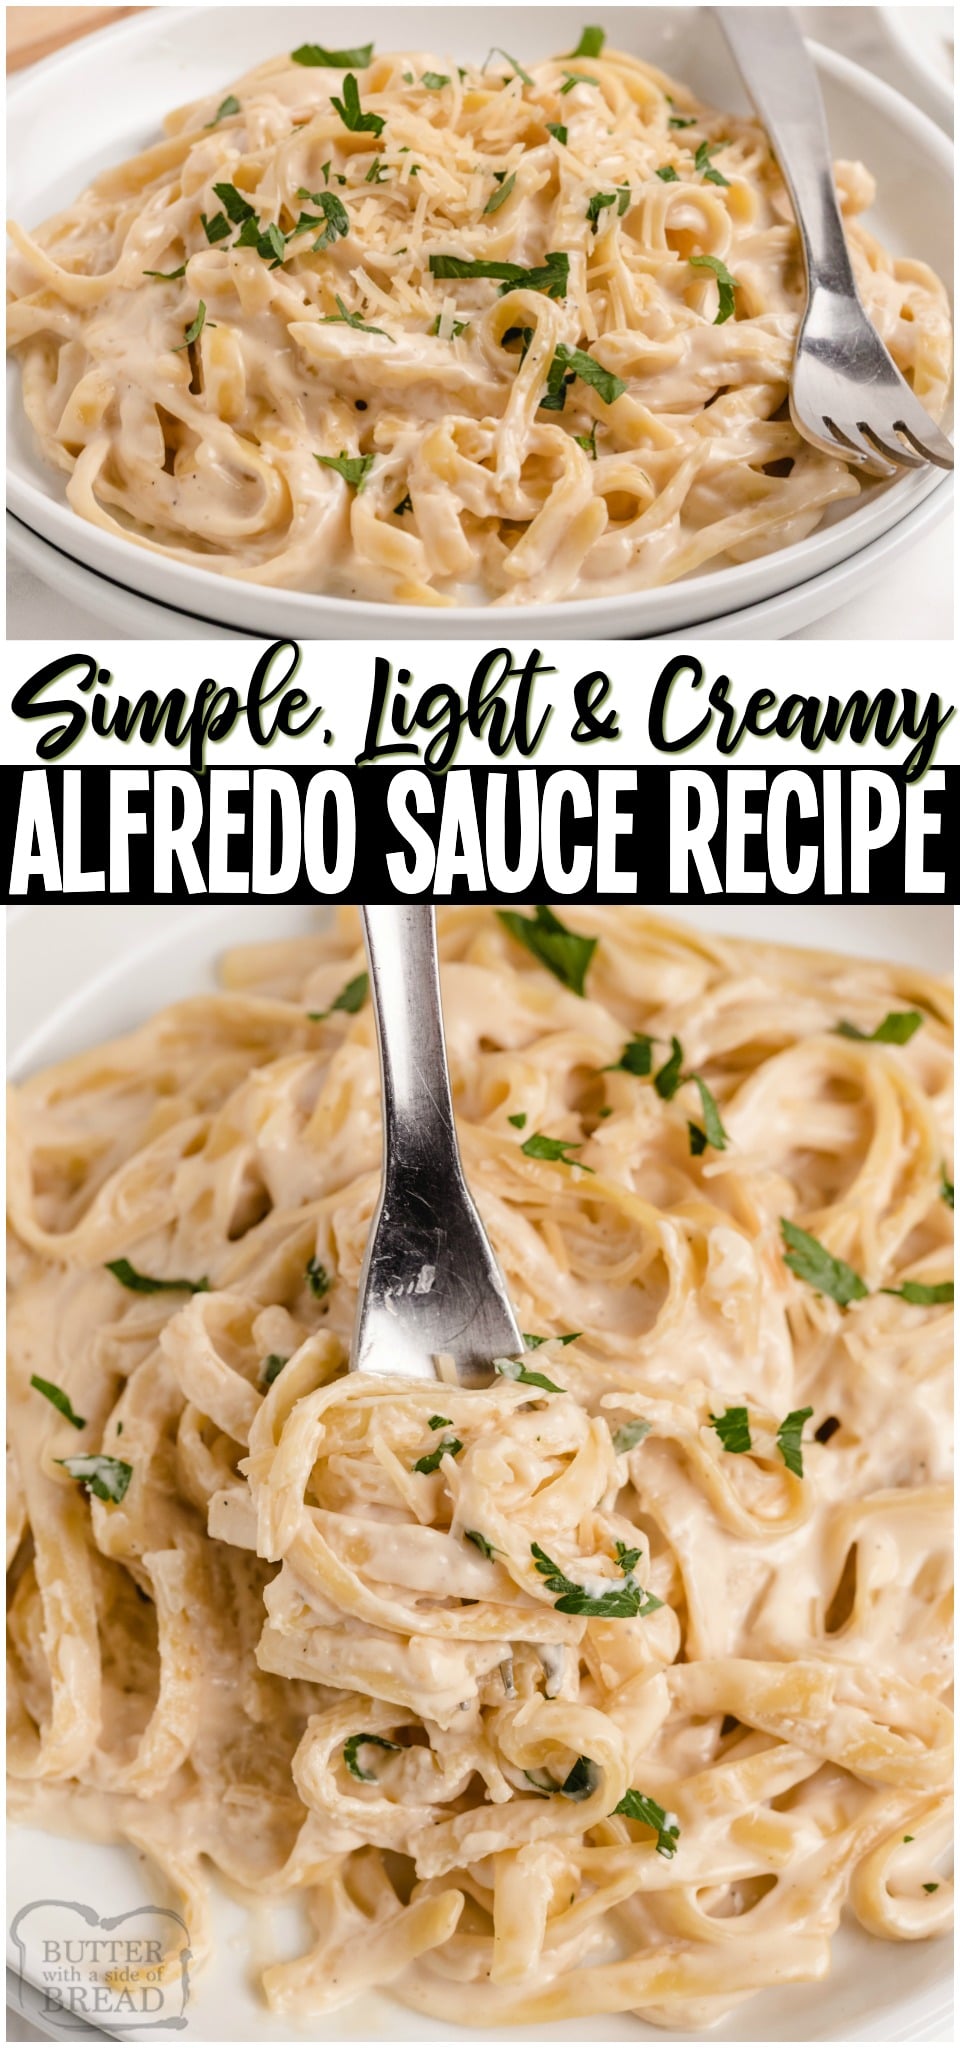 Light Fettuccine Alfredo Pasta is a family favorite dinner featuring our super simple Alfredo sauce recipe! Creamy Alfredo with a fraction of the fat & calories and all the flavor! #Alfredo #sauce #homemade #light #lowfat #lowcal #skinny #recipe #dinner from BUTTER WITH A SIDE OF BREAD